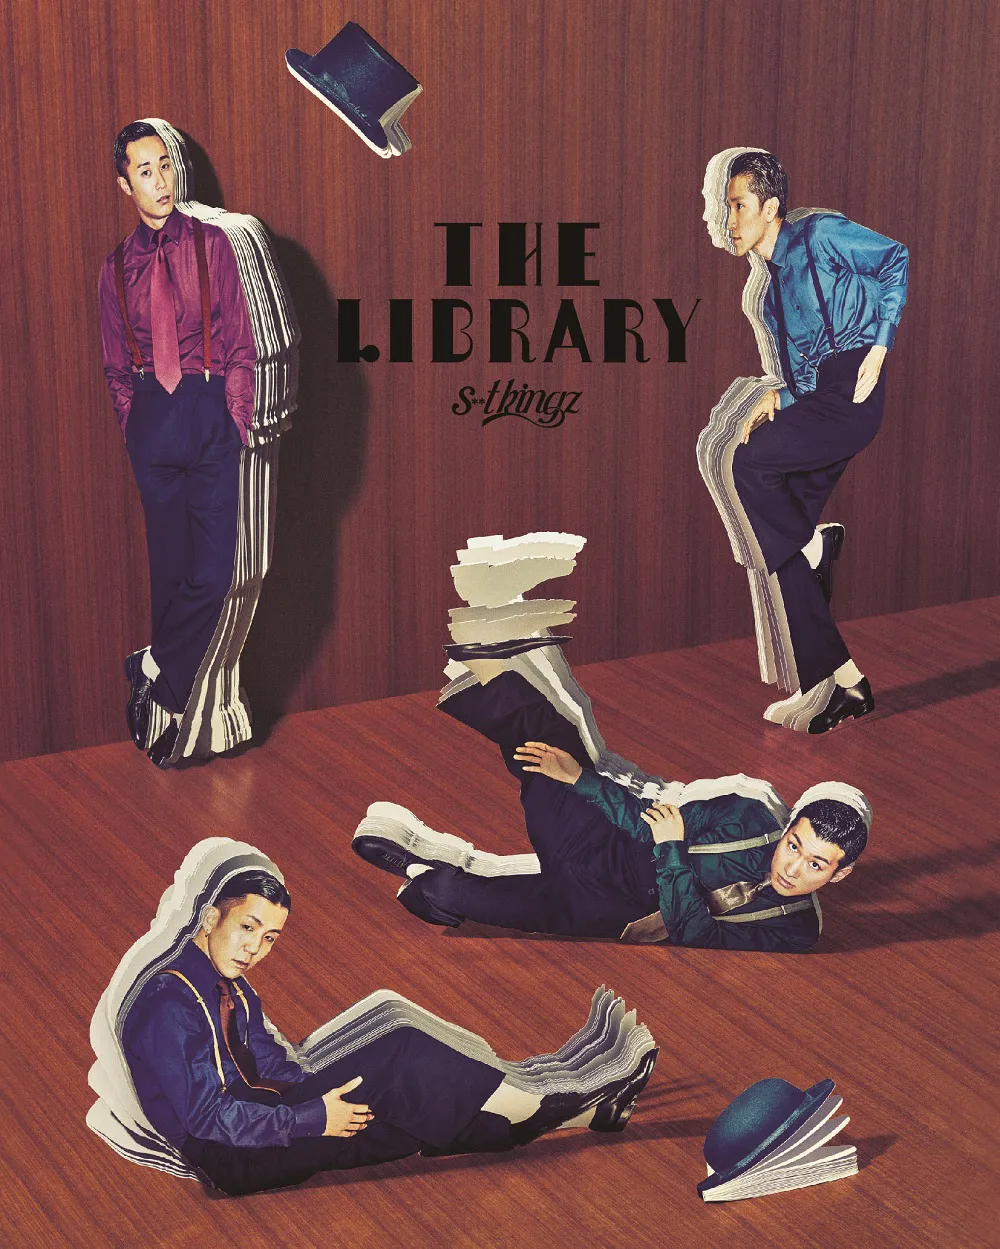 s**tkingzのツアー「The Library」がBlu-ray化！